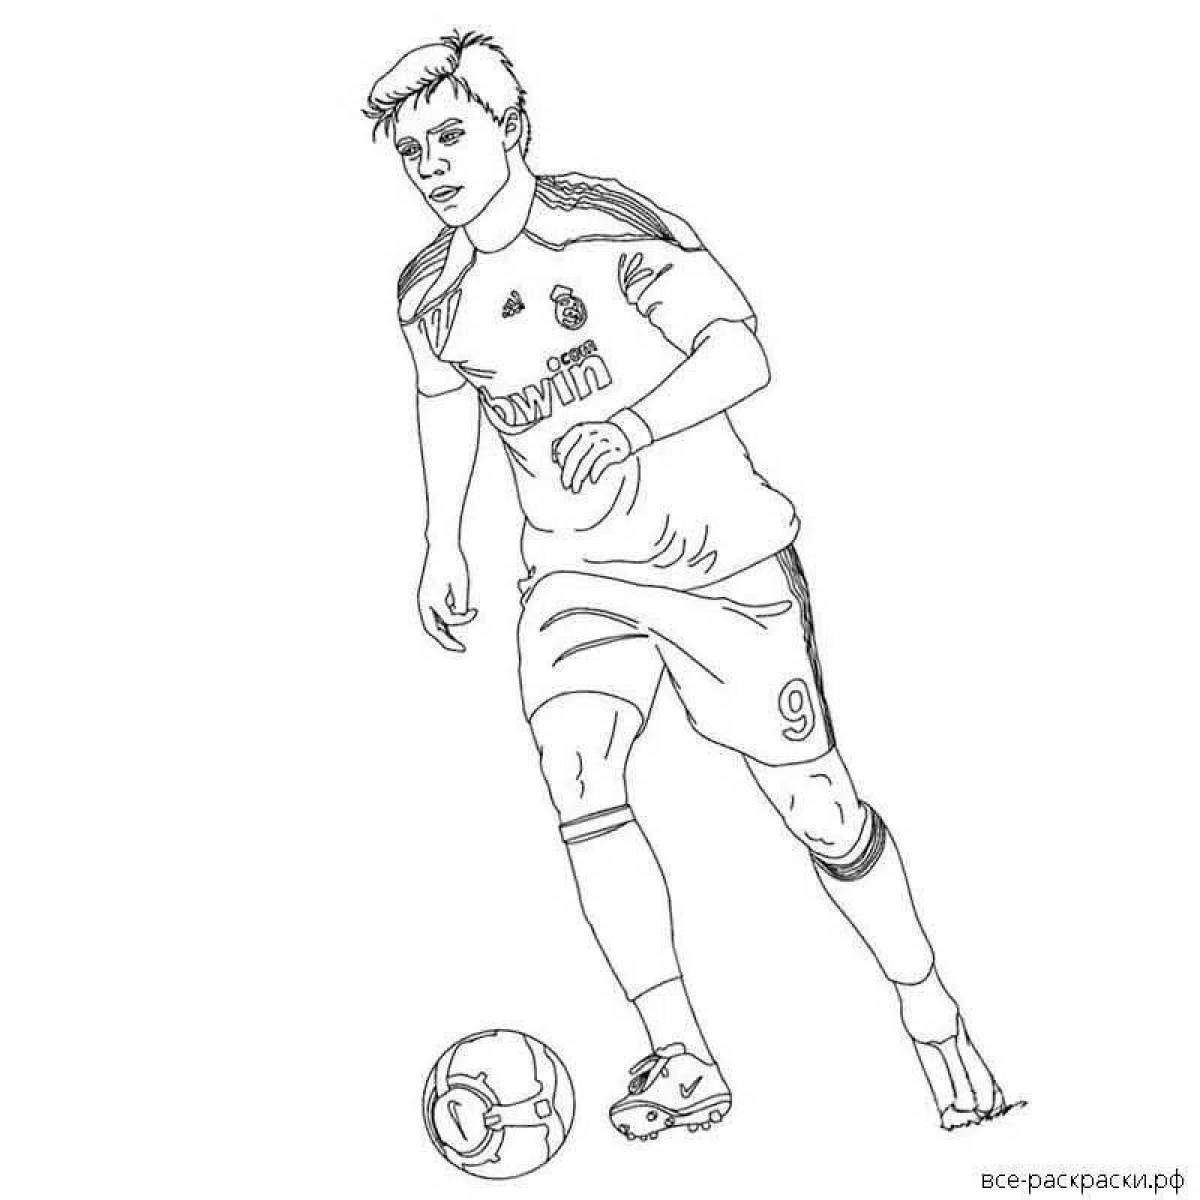 Fearless soccer player coloring page